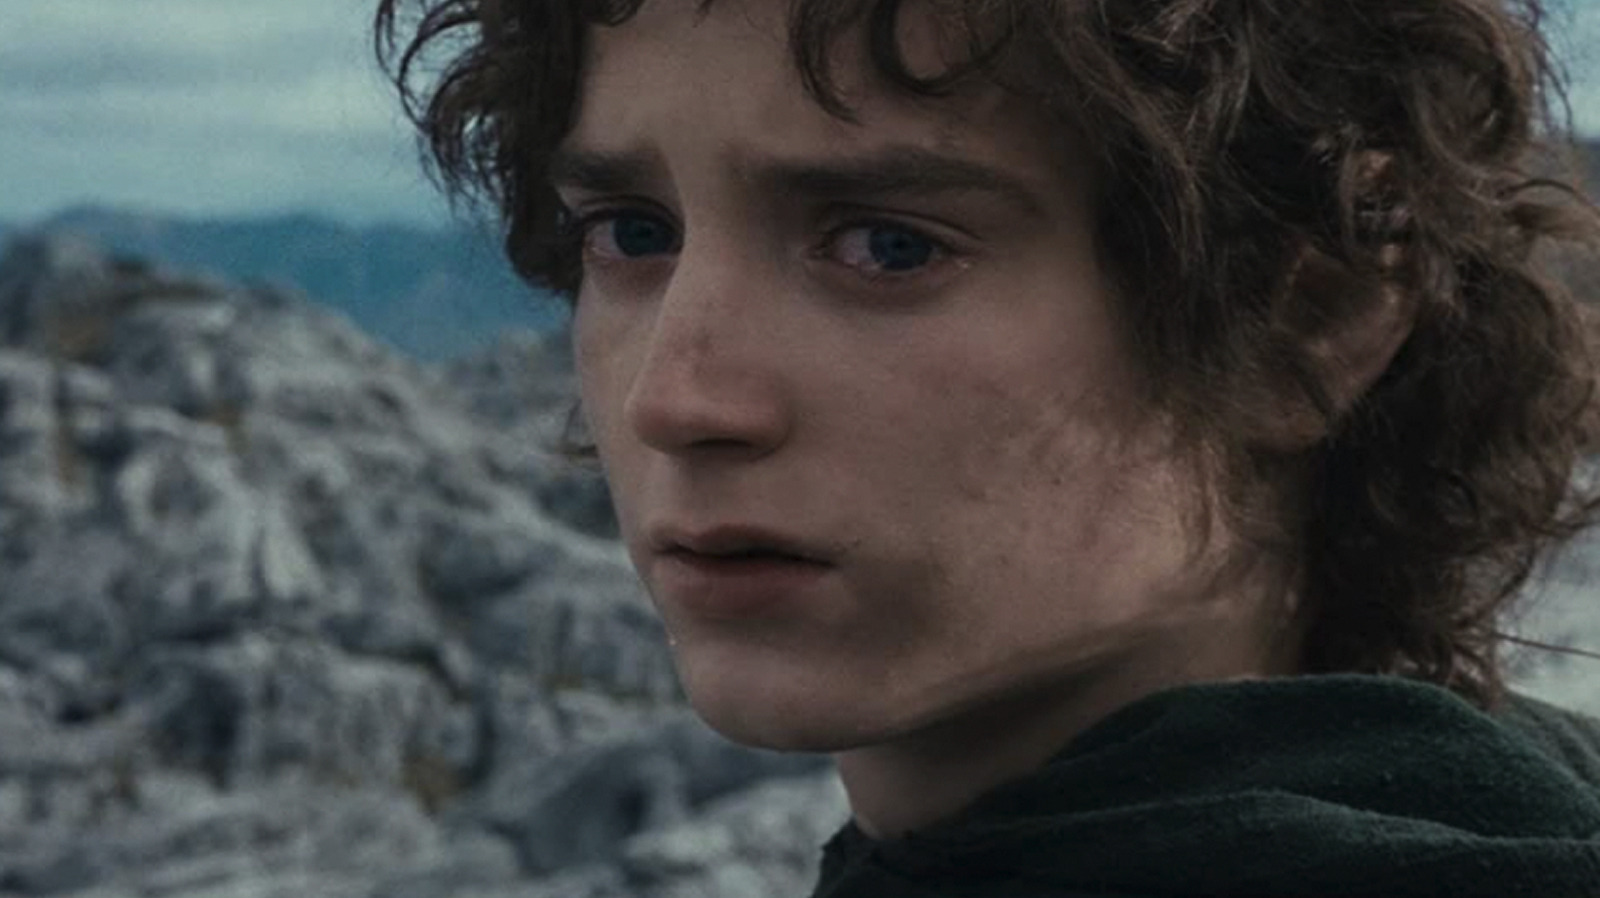 USA. Orlando Bloom in a scene from (C)New Line Cinema film: The Lord of the  Rings: The Fellowship of the Ring (2001). PLOT: A meek Hobbit from the  Shire and eight companions